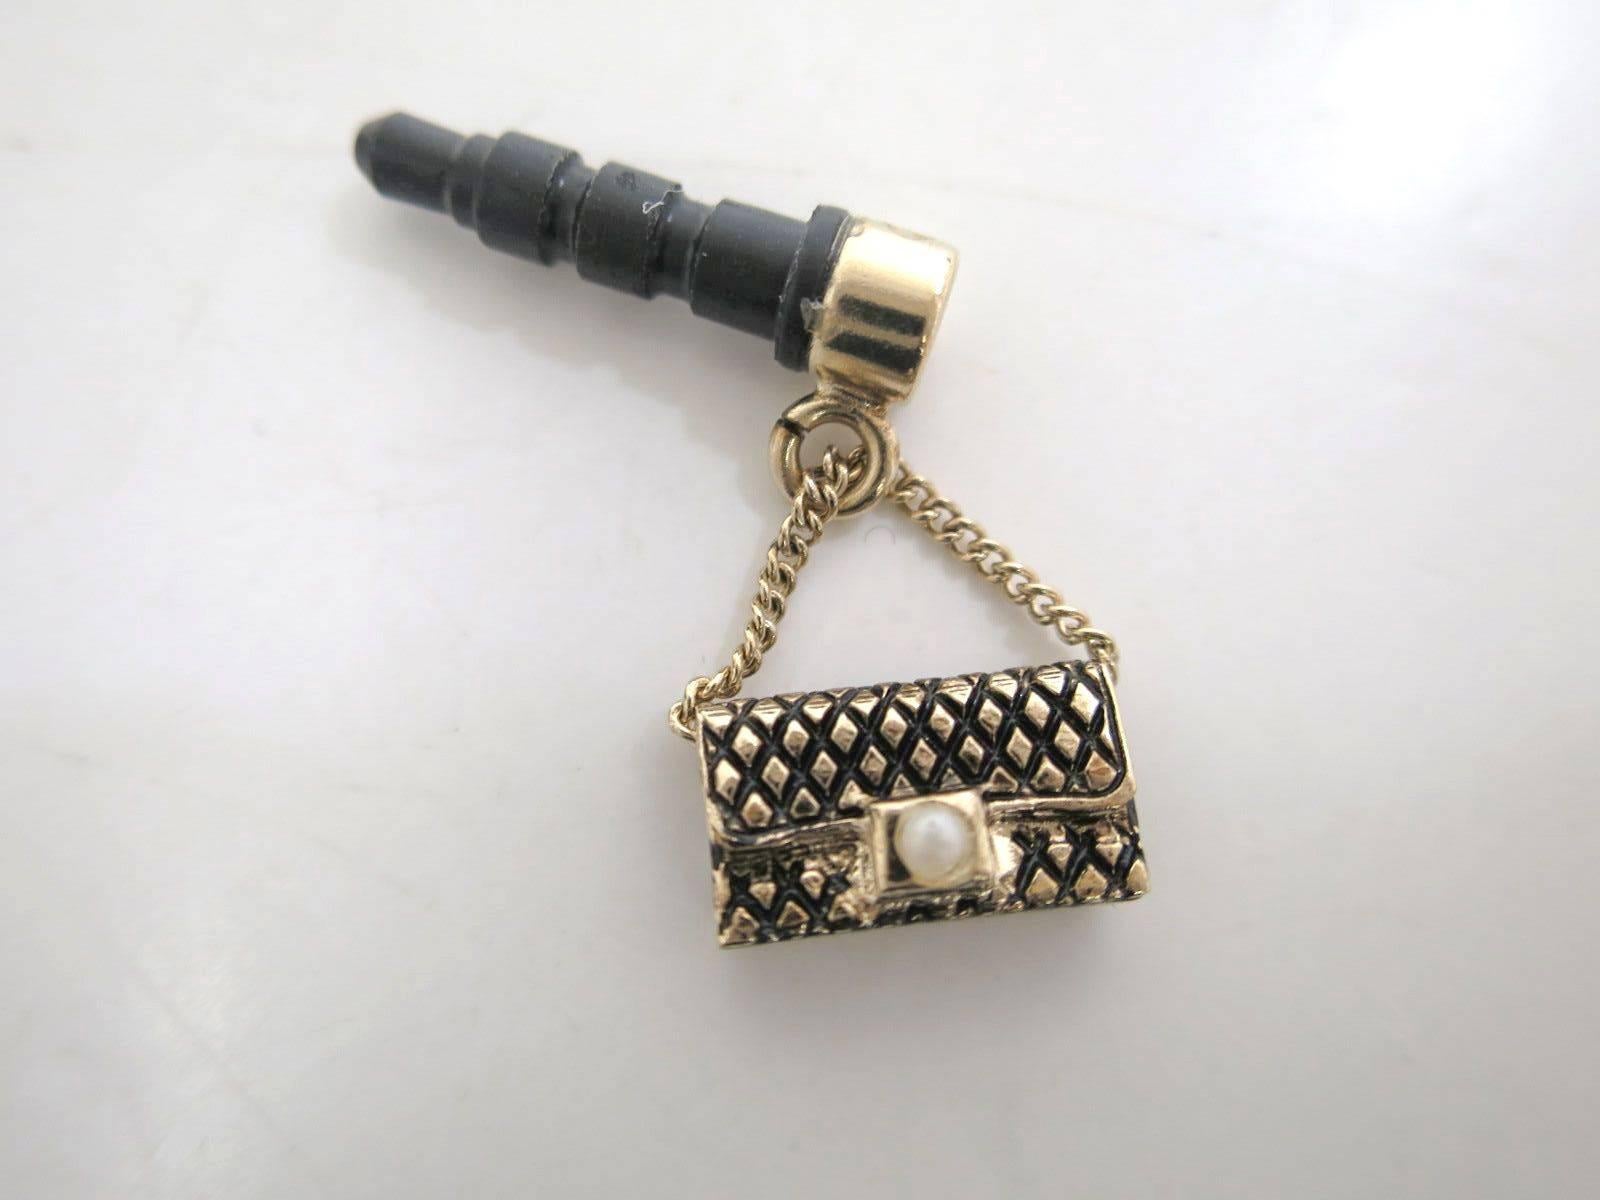 Black Chanel Three-Piece Set of Cell Phone Charms